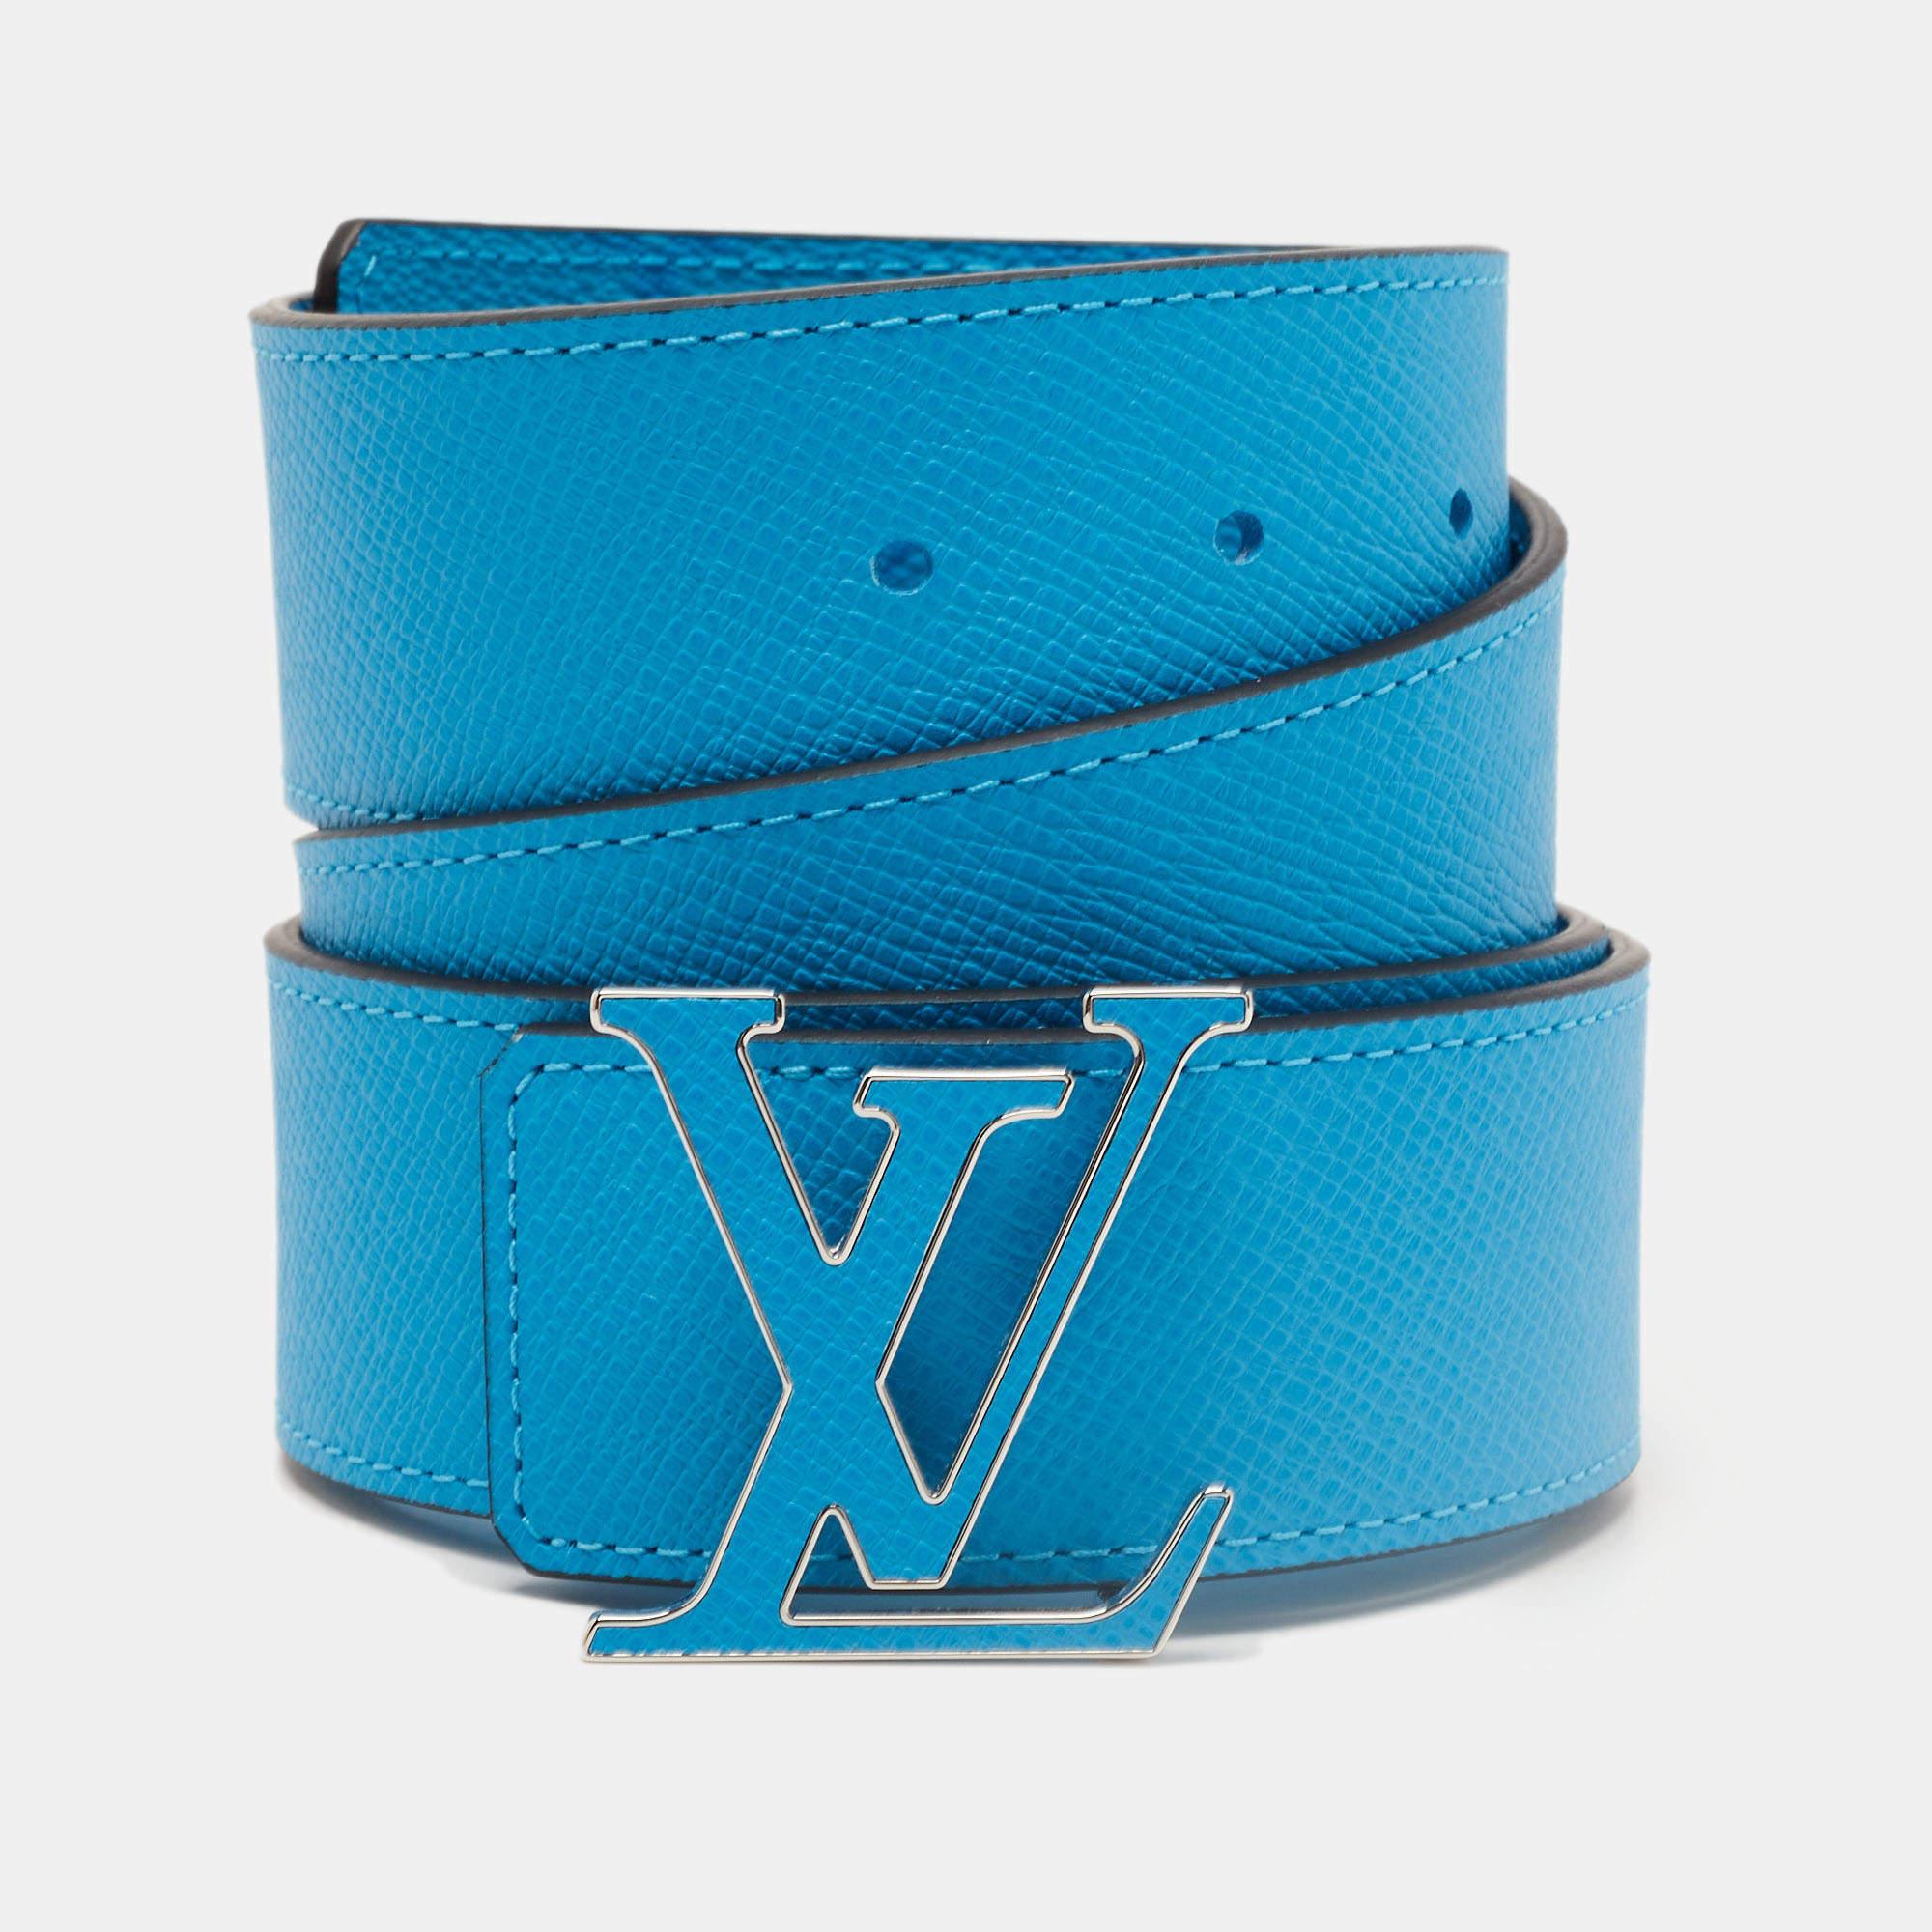 The LV Initiales belt is a stylish accessory from Louis Vuitton. Made from high-quality leather, it features a reversible design with the iconic LV monogram on one side and a solid color on the other. The belt is adjustable and showcases the brand's